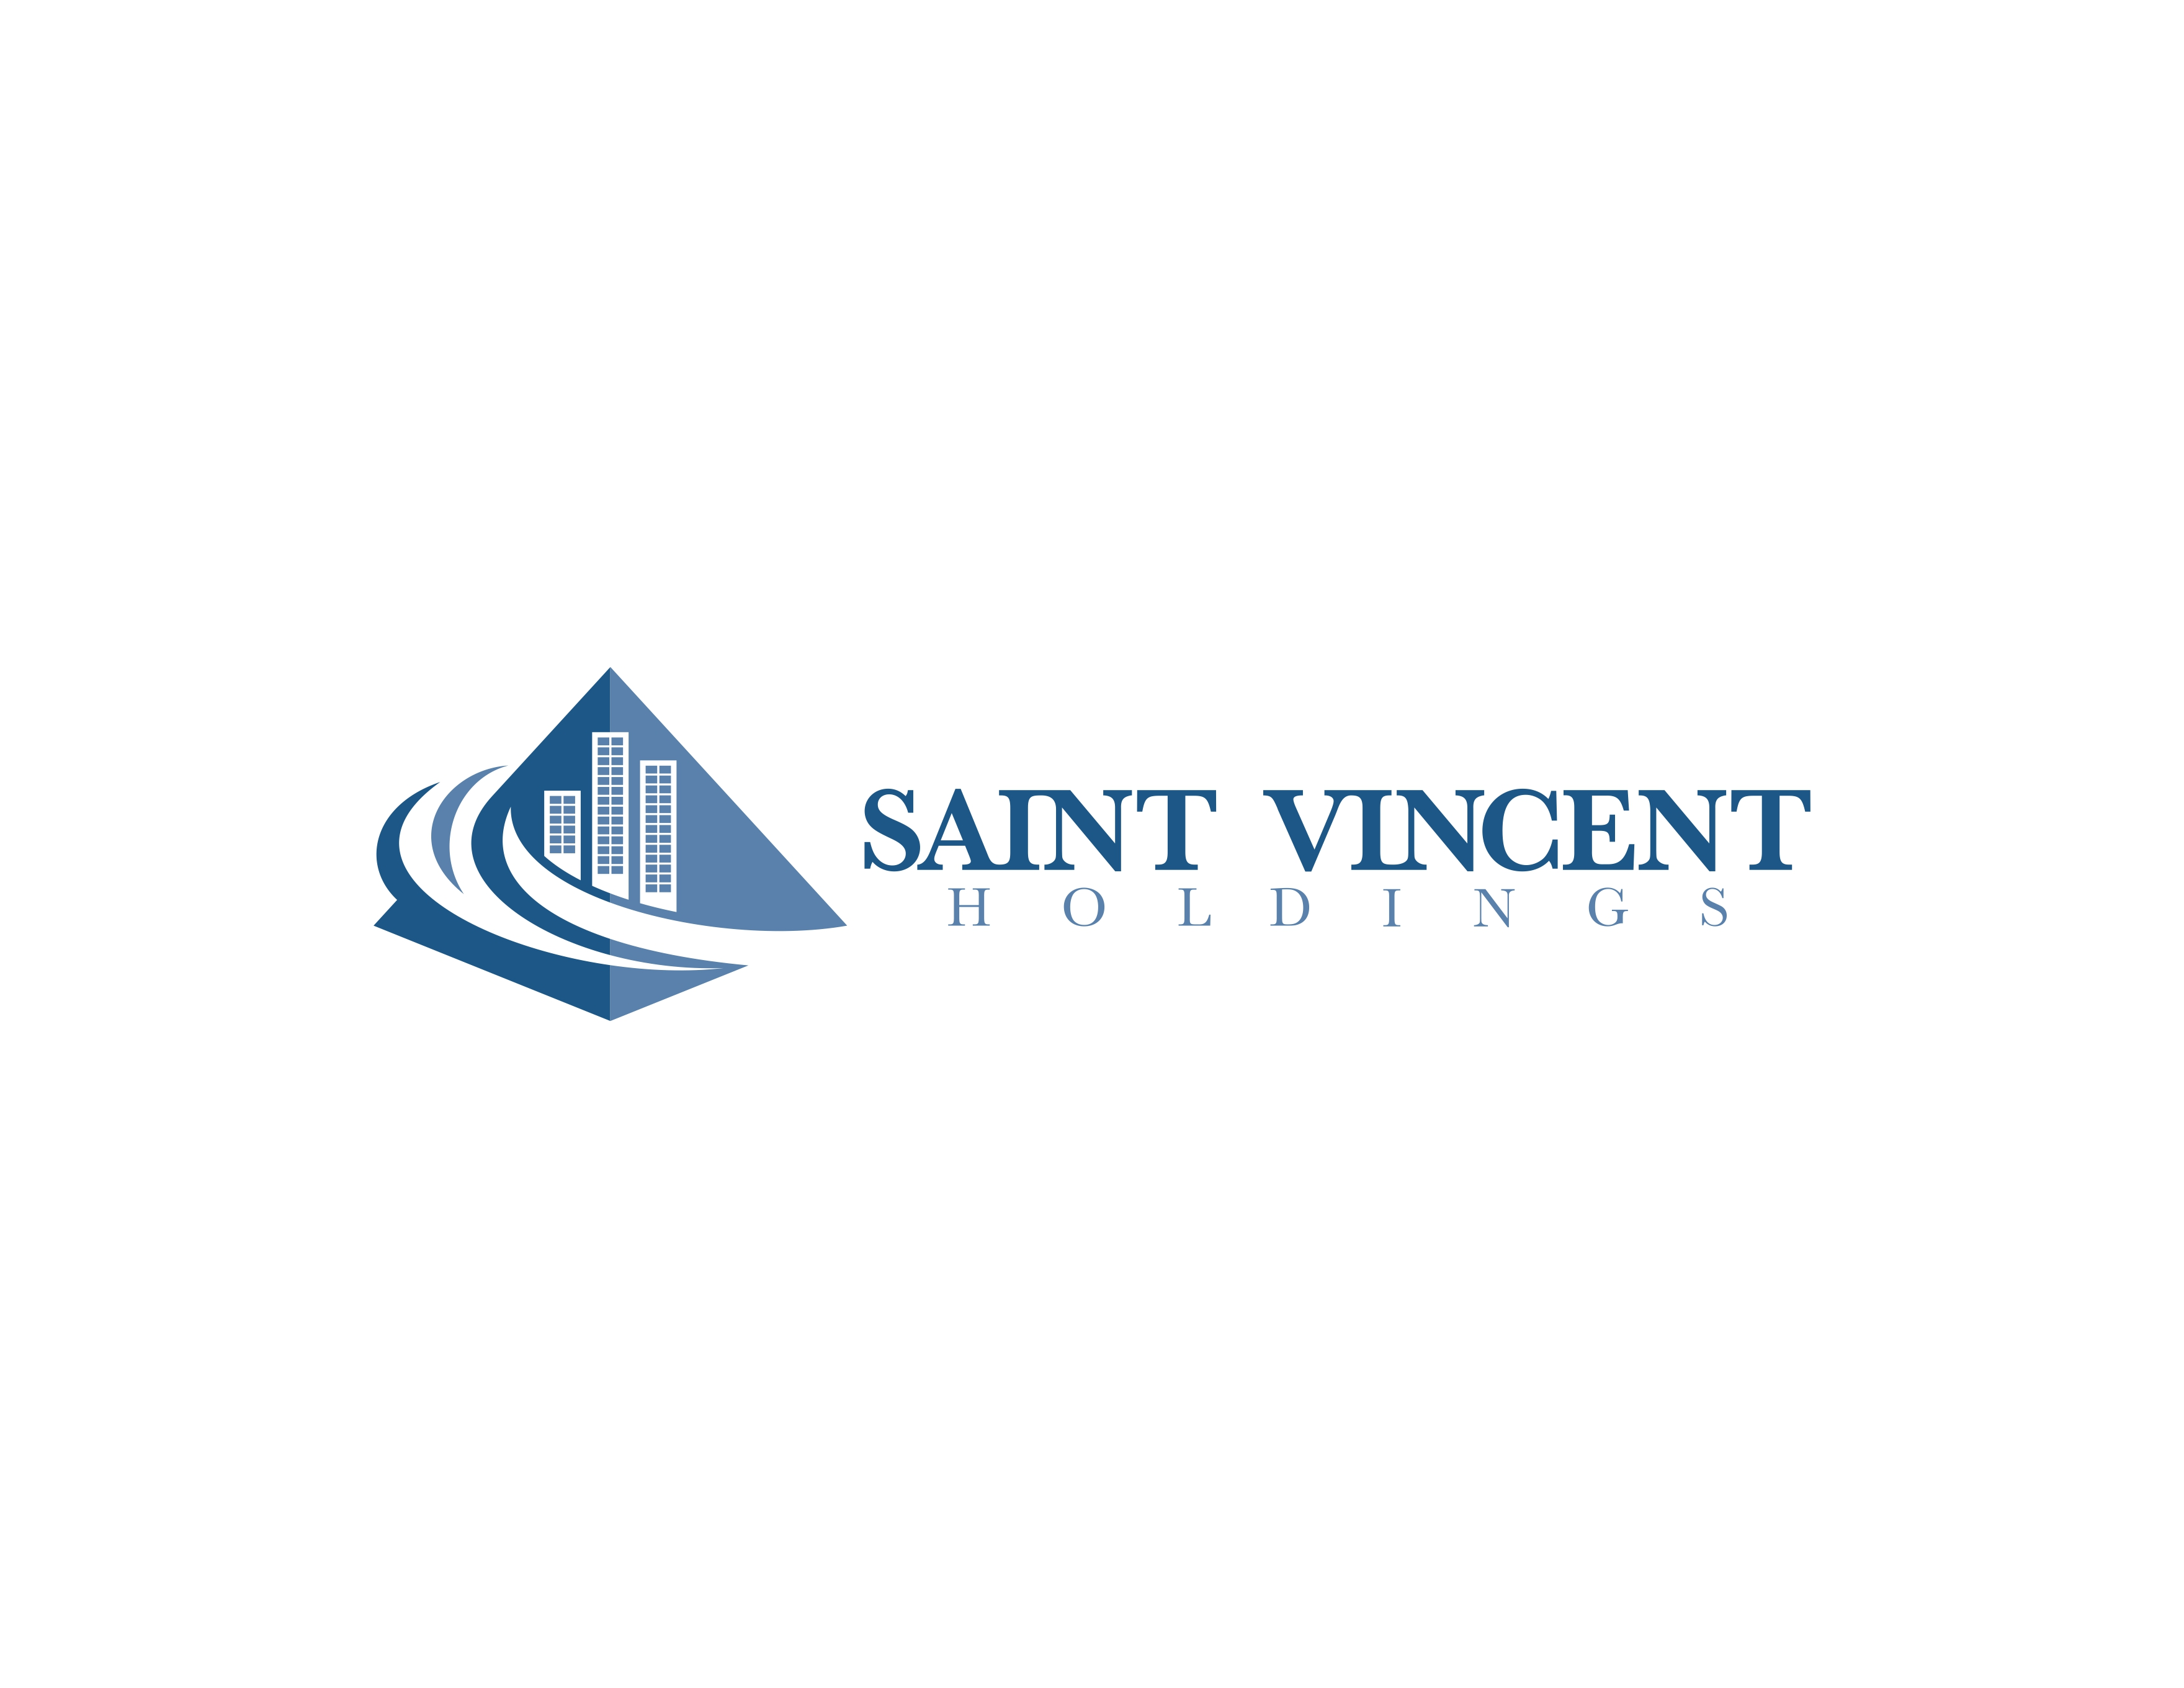 Saint Vincent Holdings Launches to Deliver Trading Tools and'